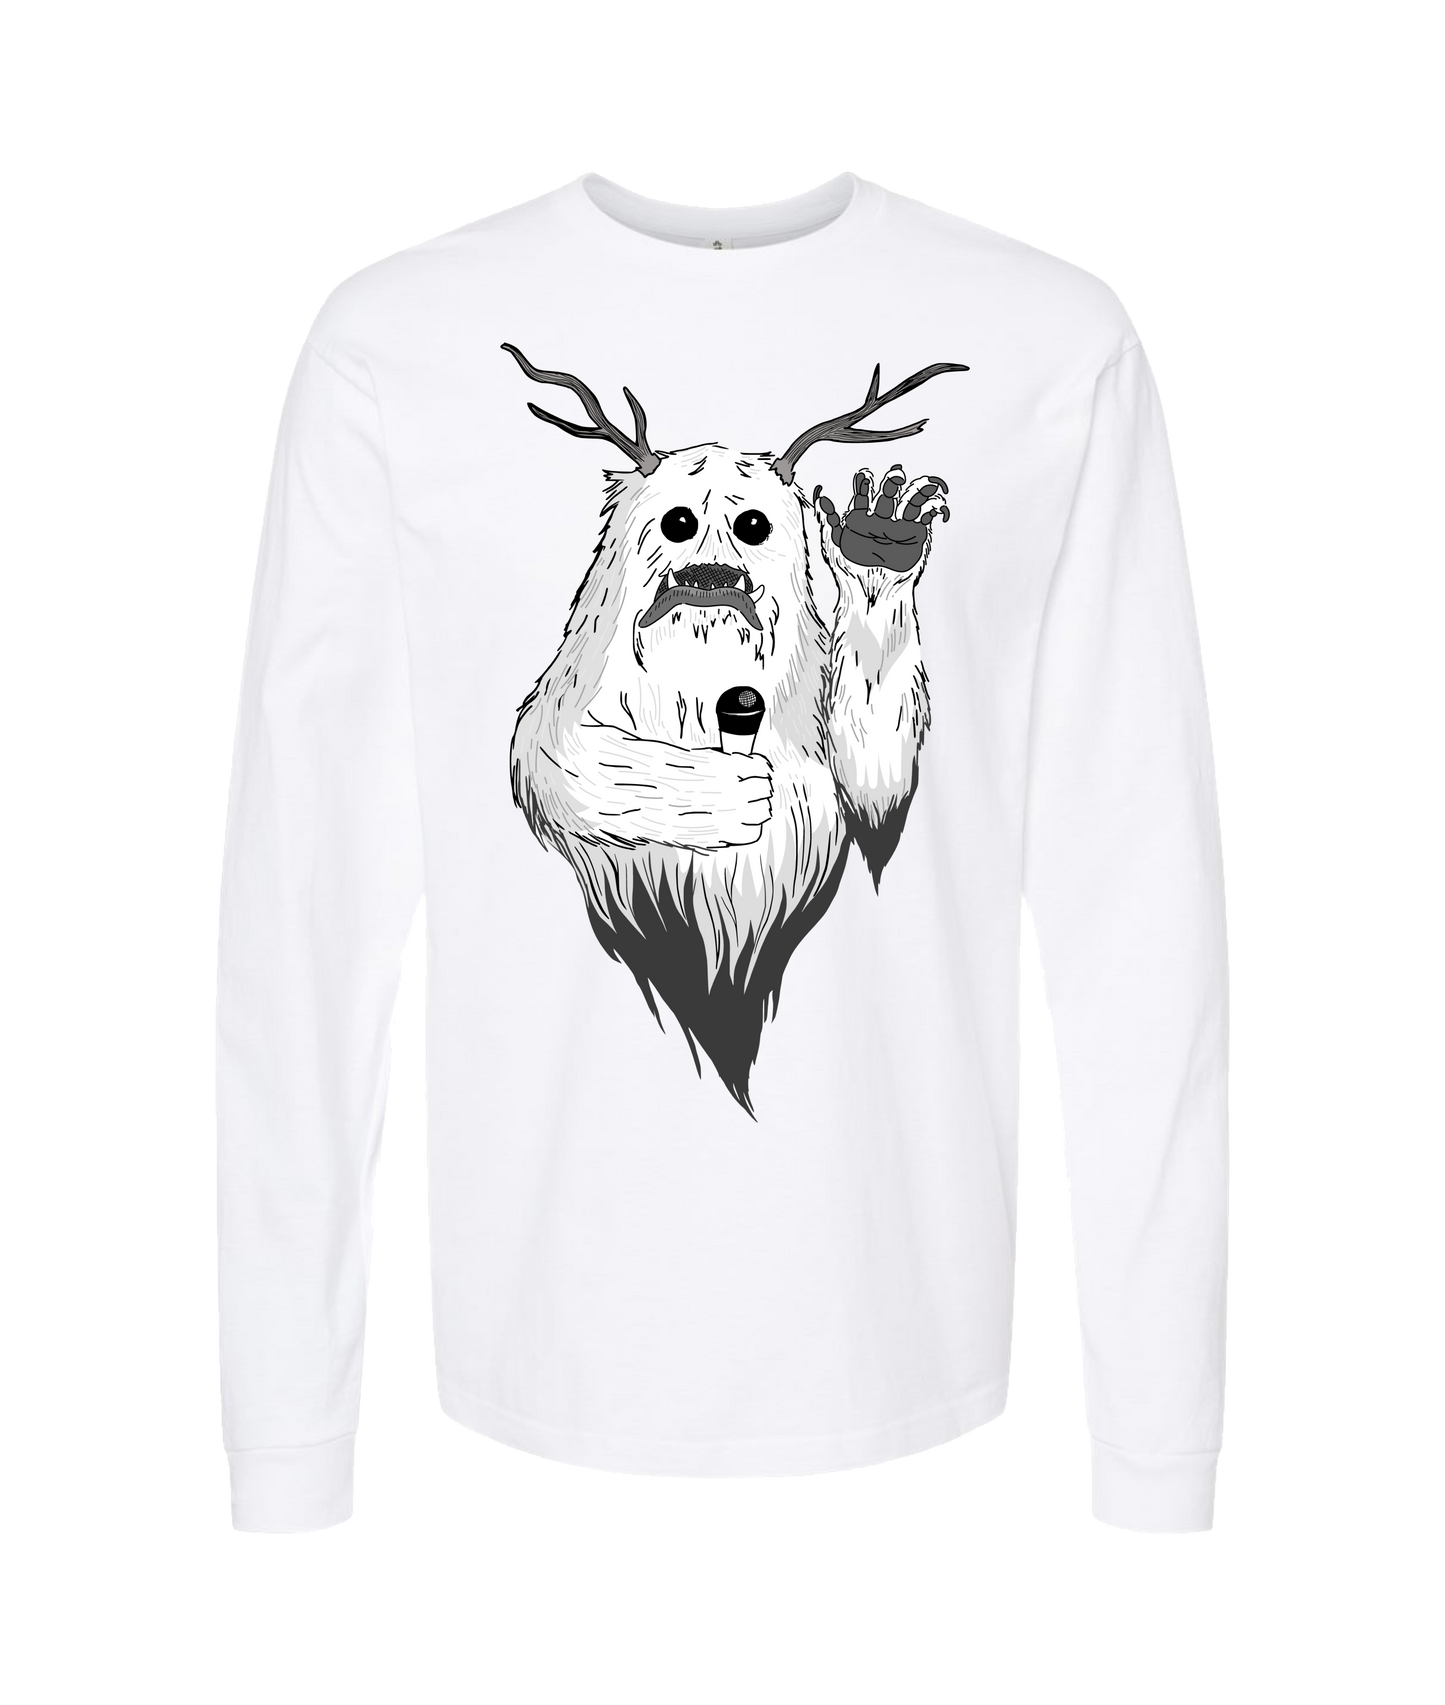 Sparks Across Darkness - Sparky - White Long Sleeve T